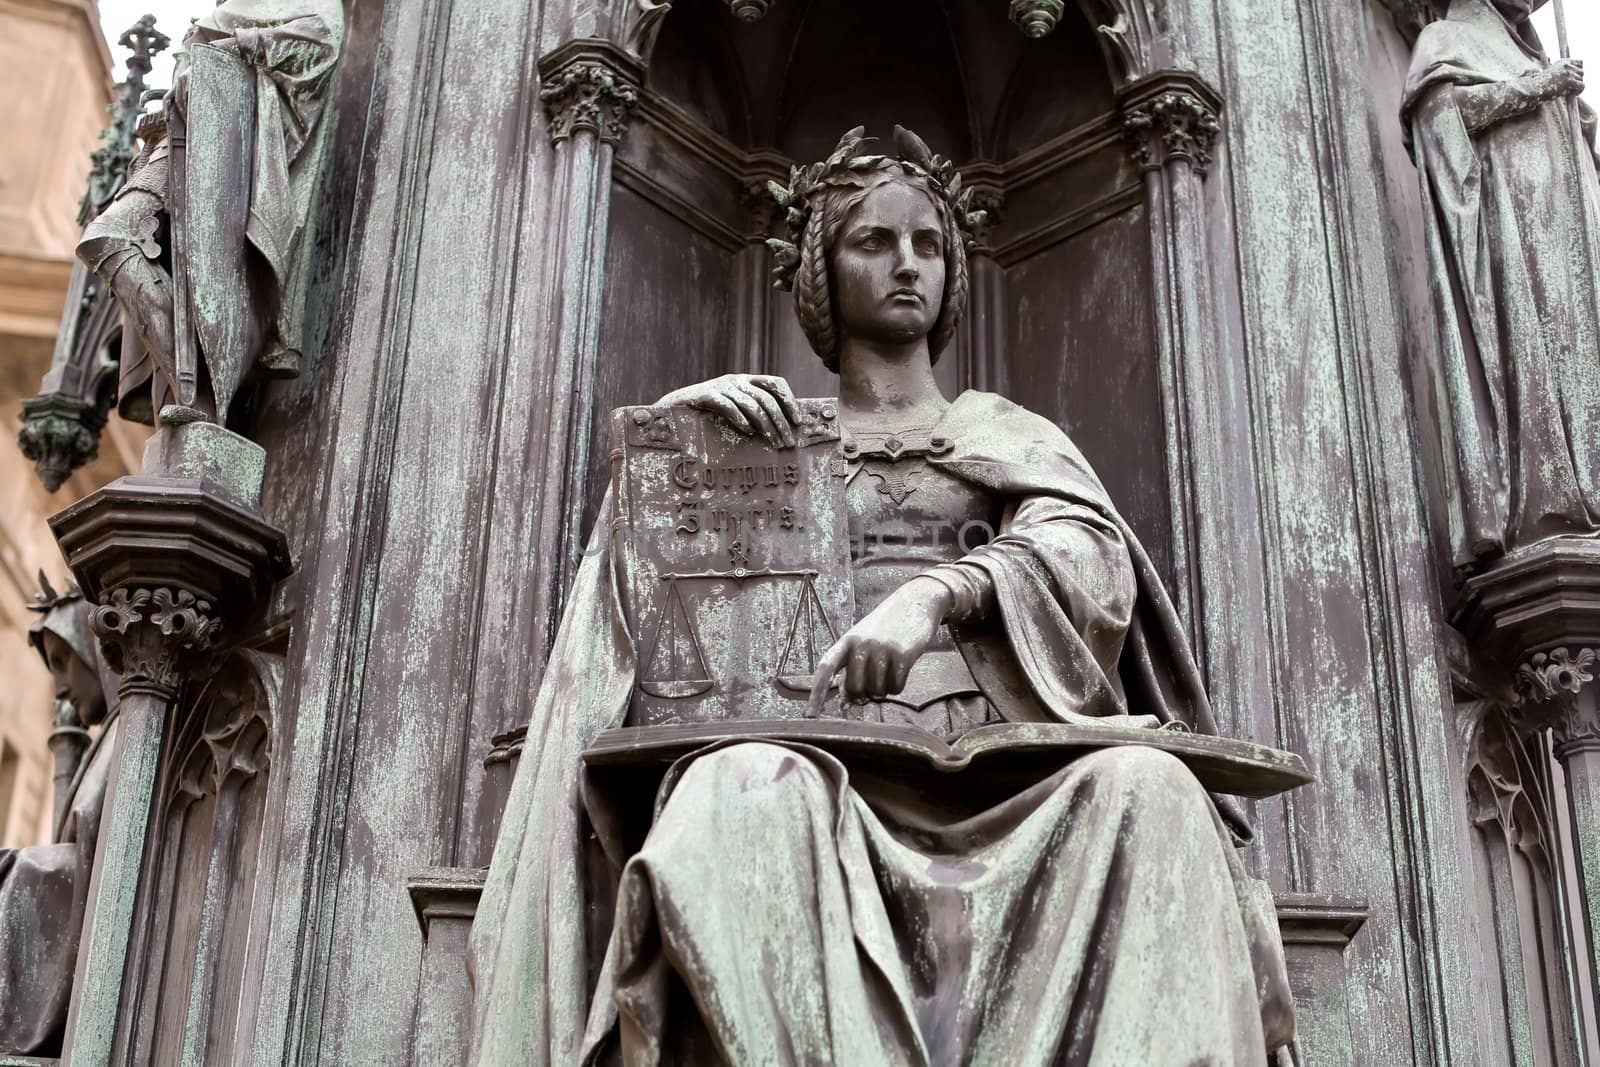 An image of an old monument in Prague